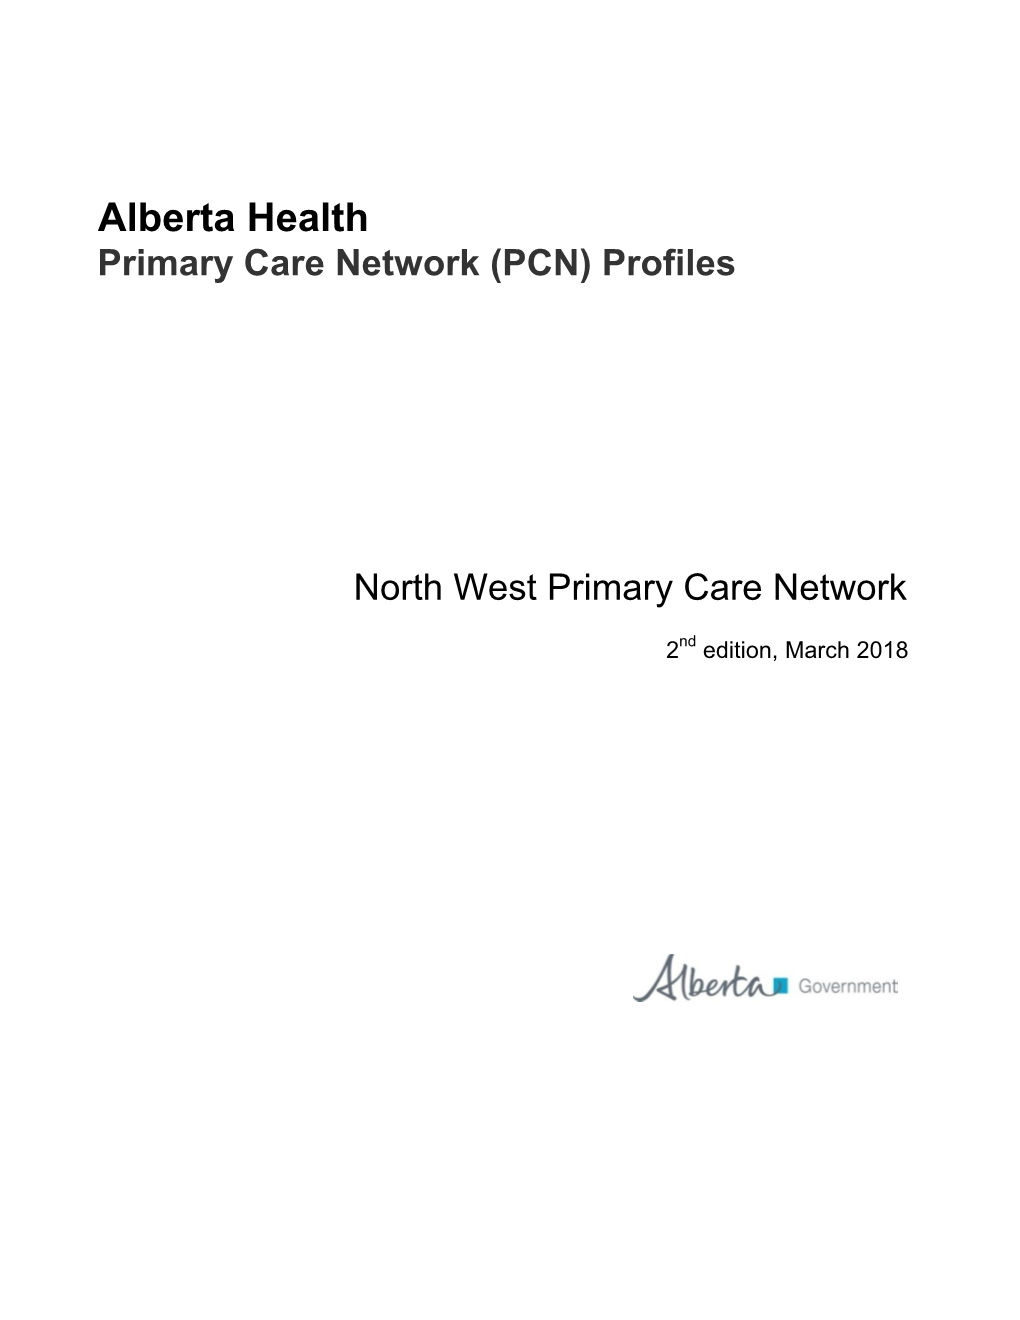 North West Primary Care Network